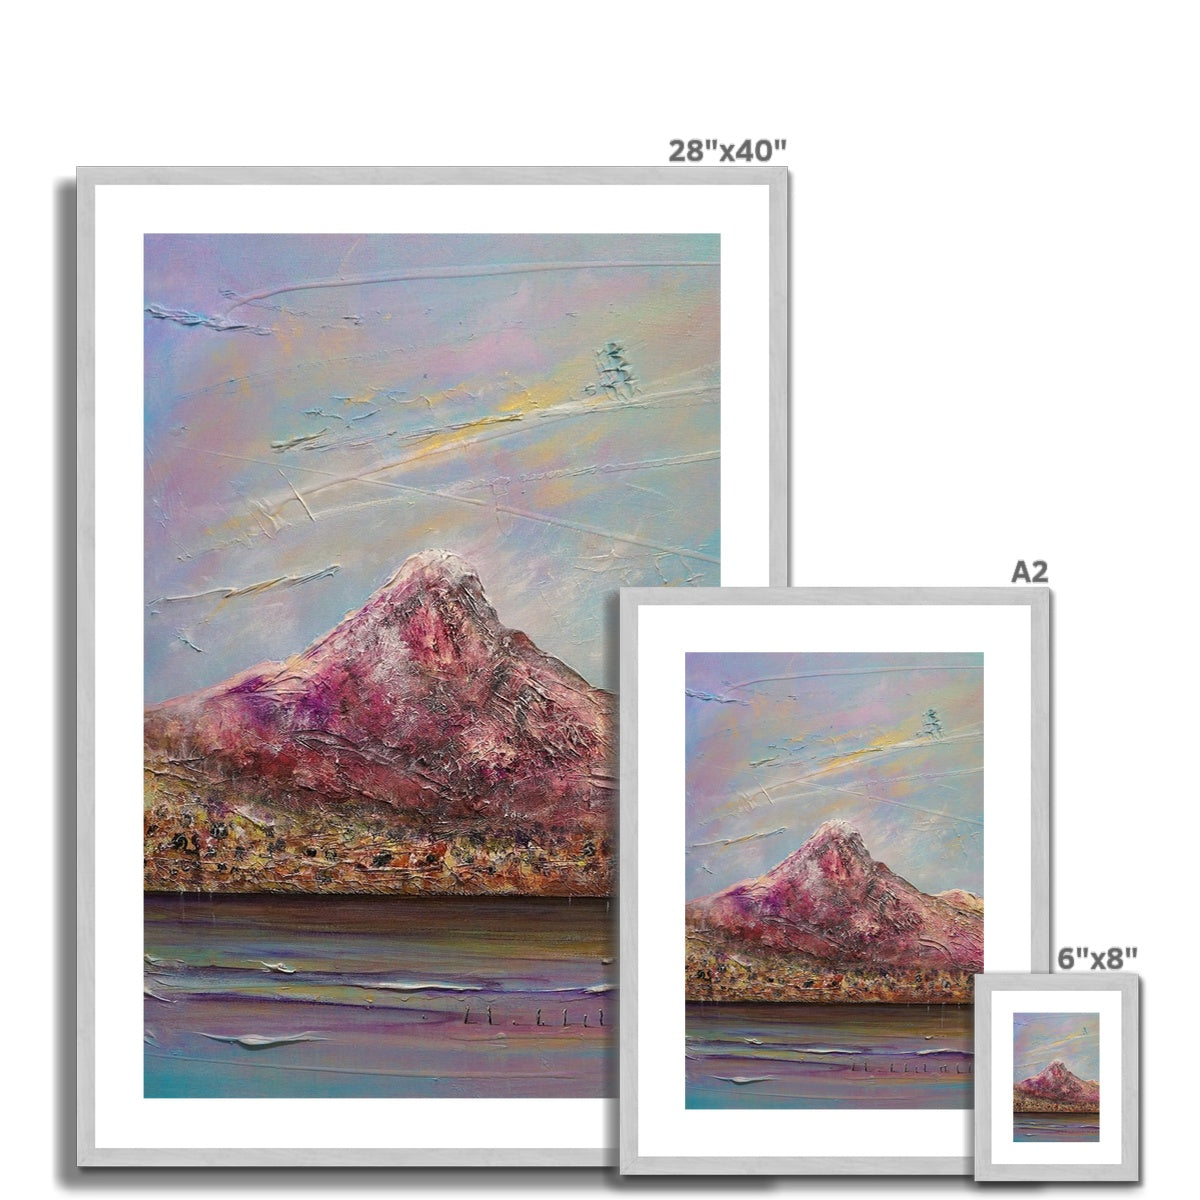 Ben Lomond Painting | Antique Framed & Mounted Prints From Scotland-Antique Framed & Mounted Prints-Scottish Lochs & Mountains Art Gallery-Paintings, Prints, Homeware, Art Gifts From Scotland By Scottish Artist Kevin Hunter